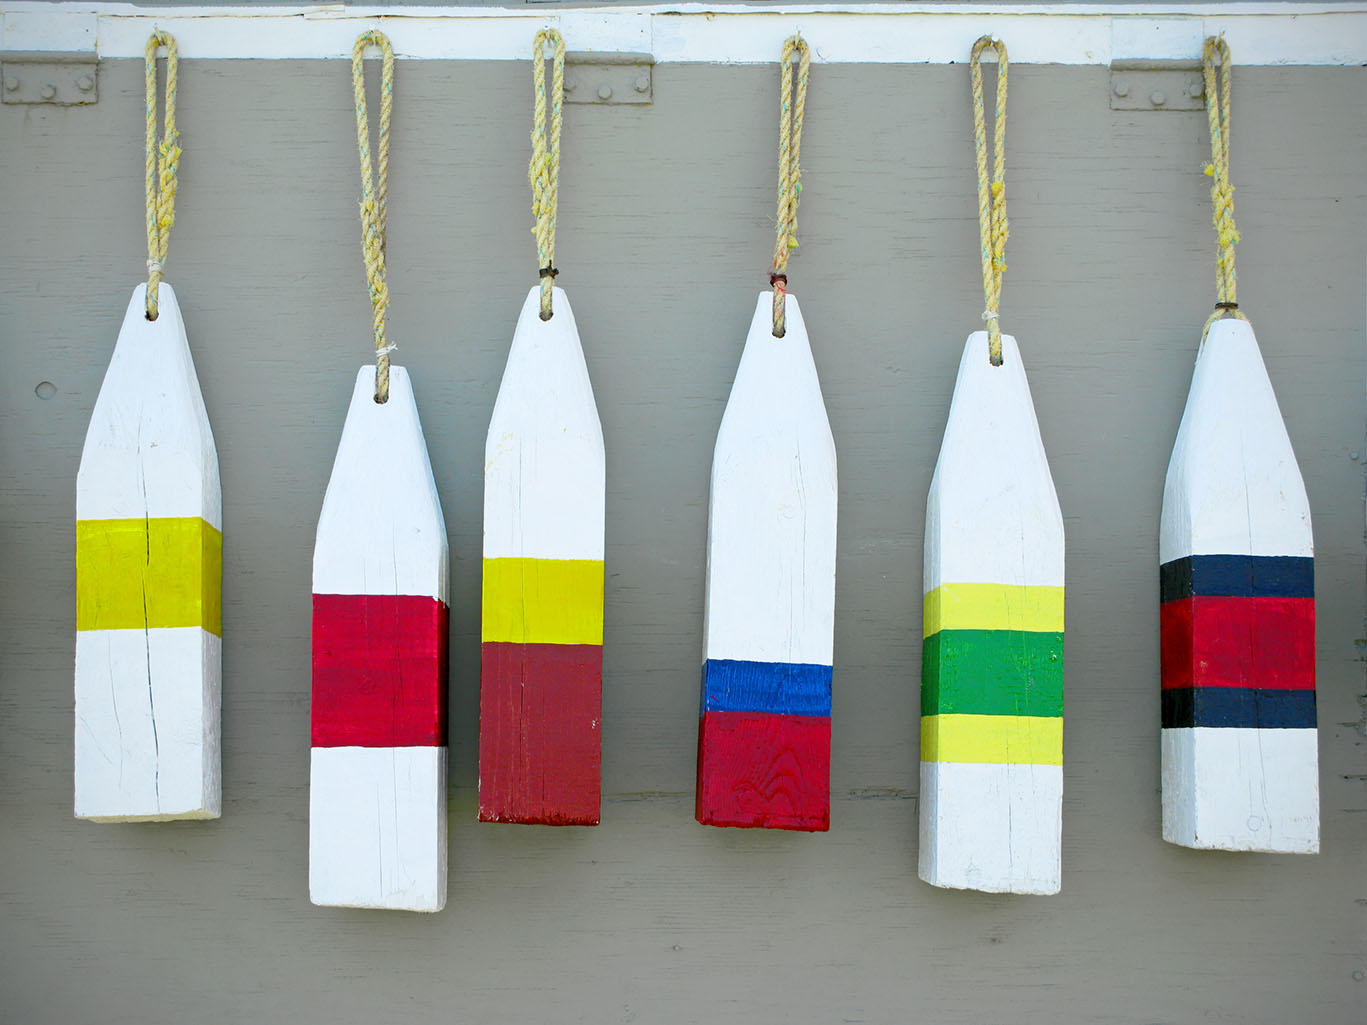 Wooden Lobster fishing buoys traditional to Atlantic Canada and the New England states. The buoys were painted in colours  that were unique to each boat. These ones are hanging in front of grey plywood.